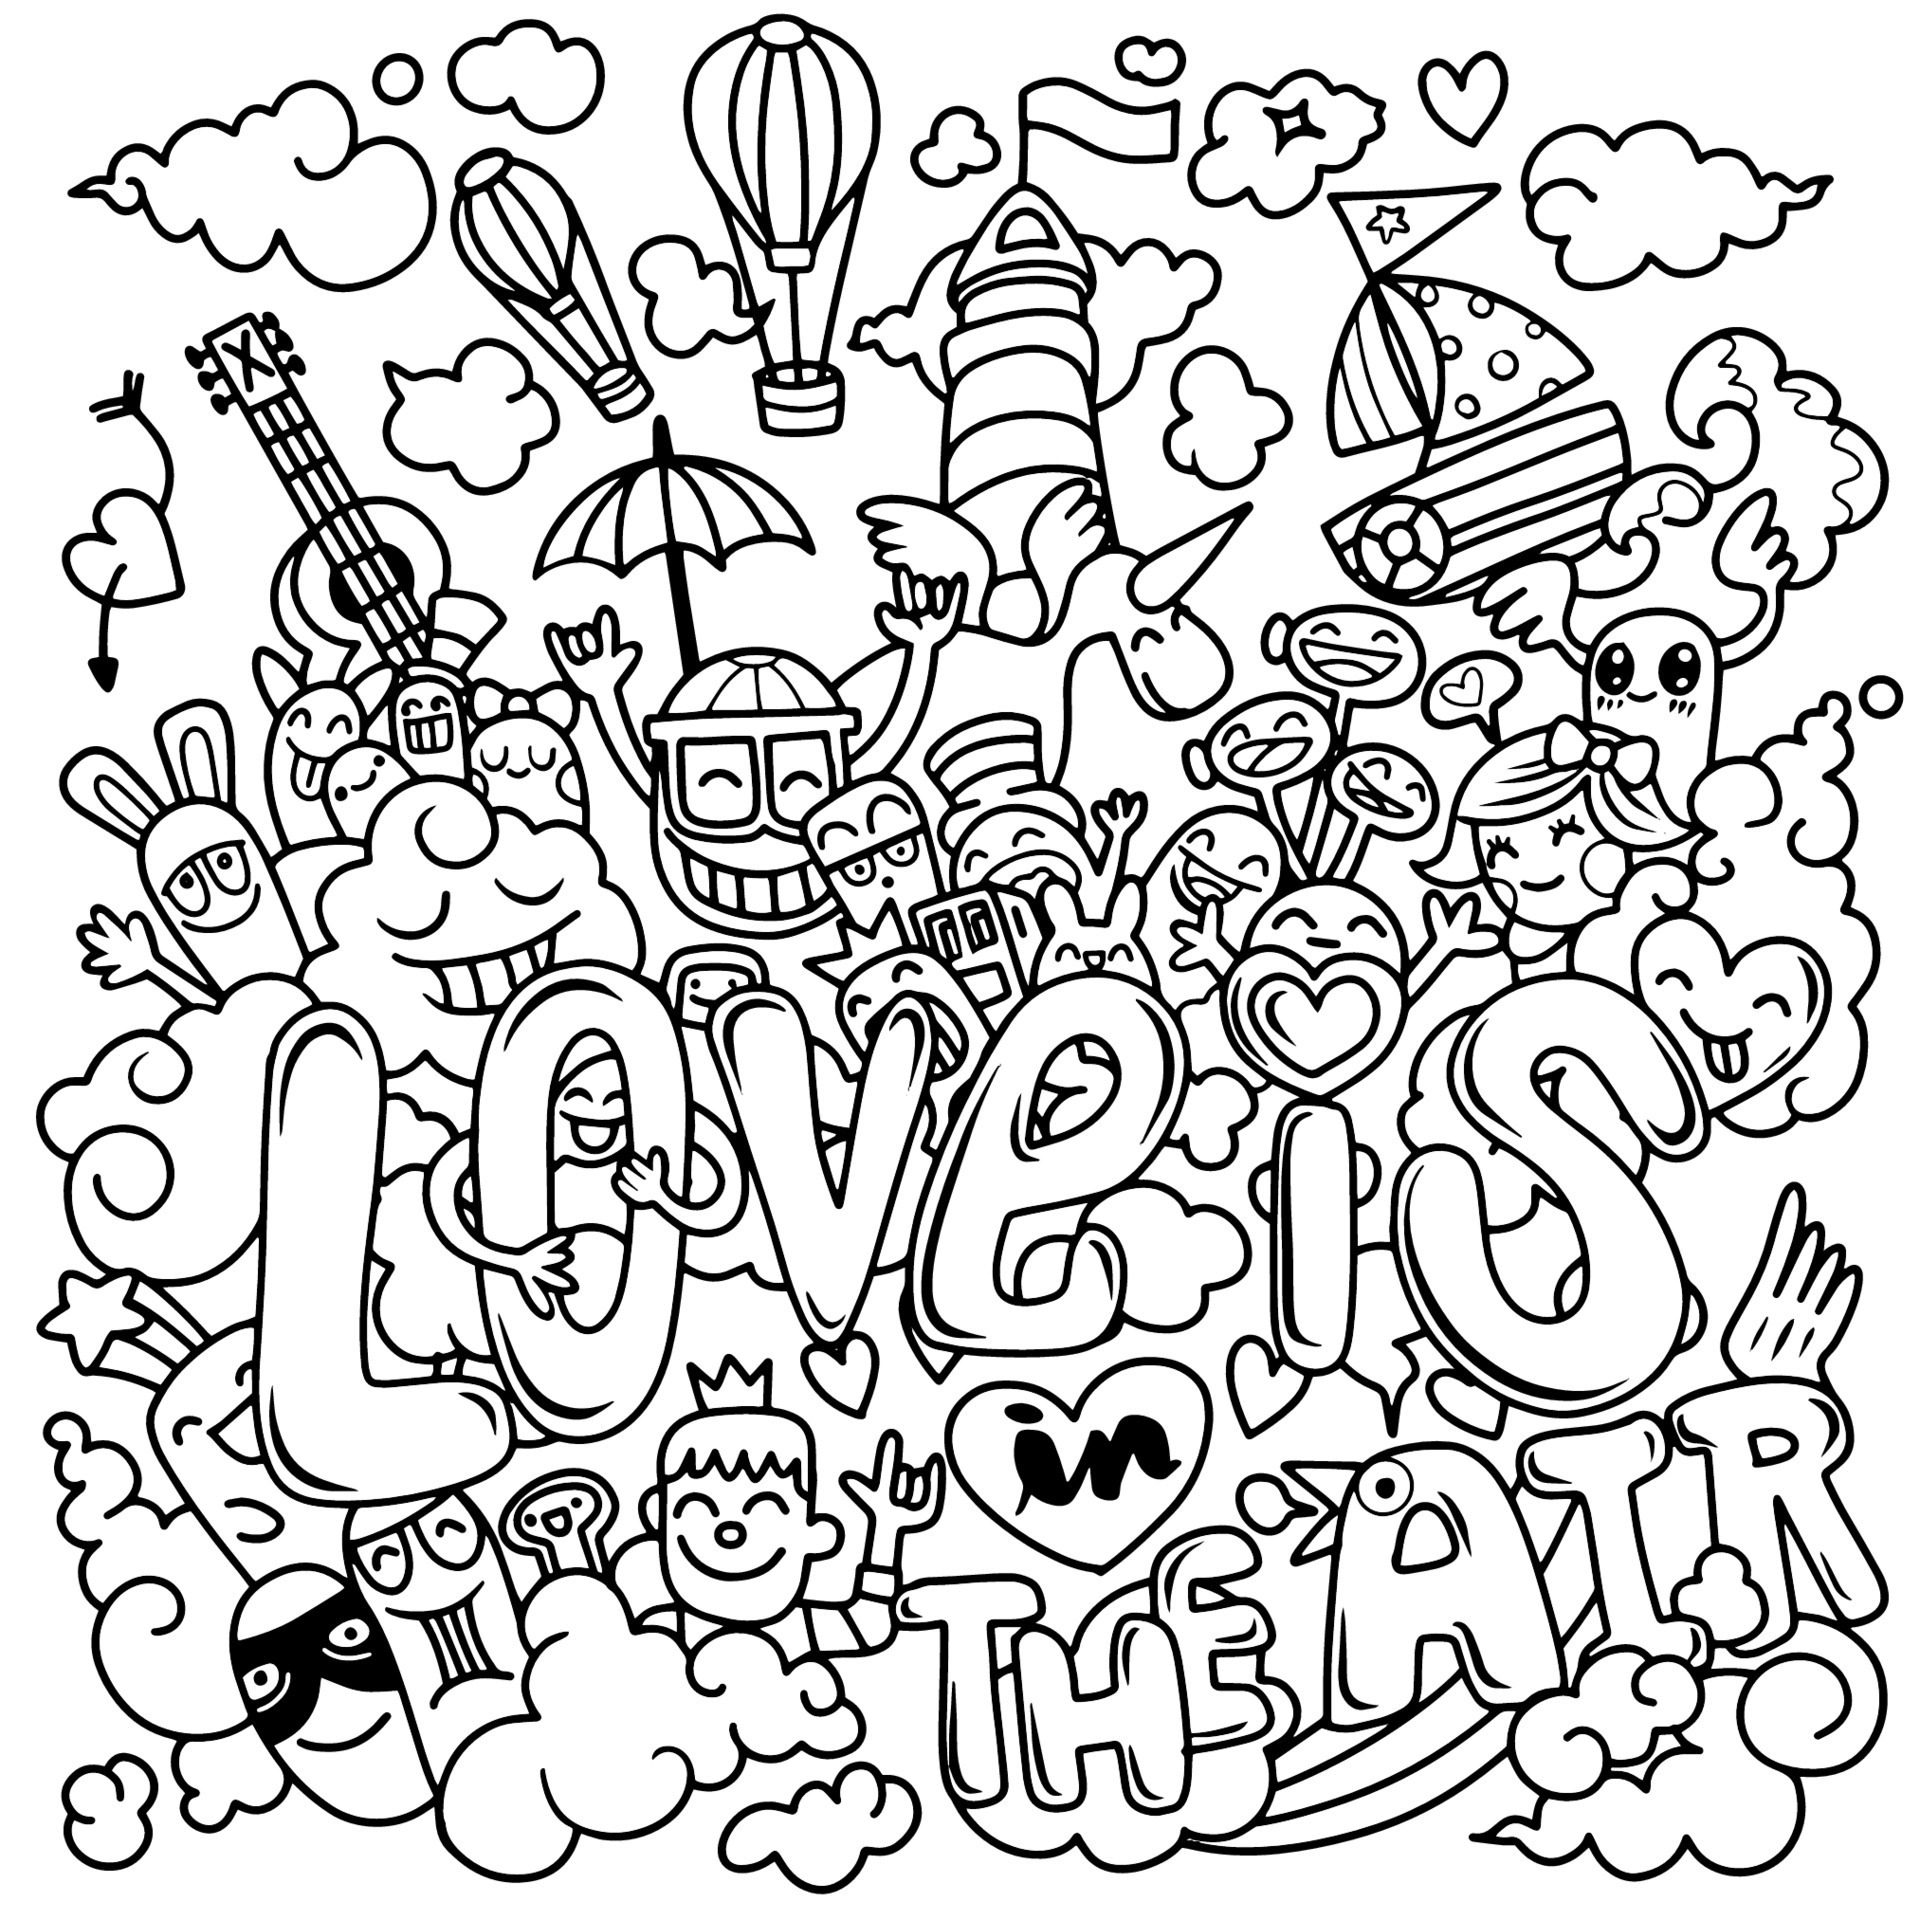 Love is in the air. Hand drawn Hand Drawn Vector Illustration of Doodle ...